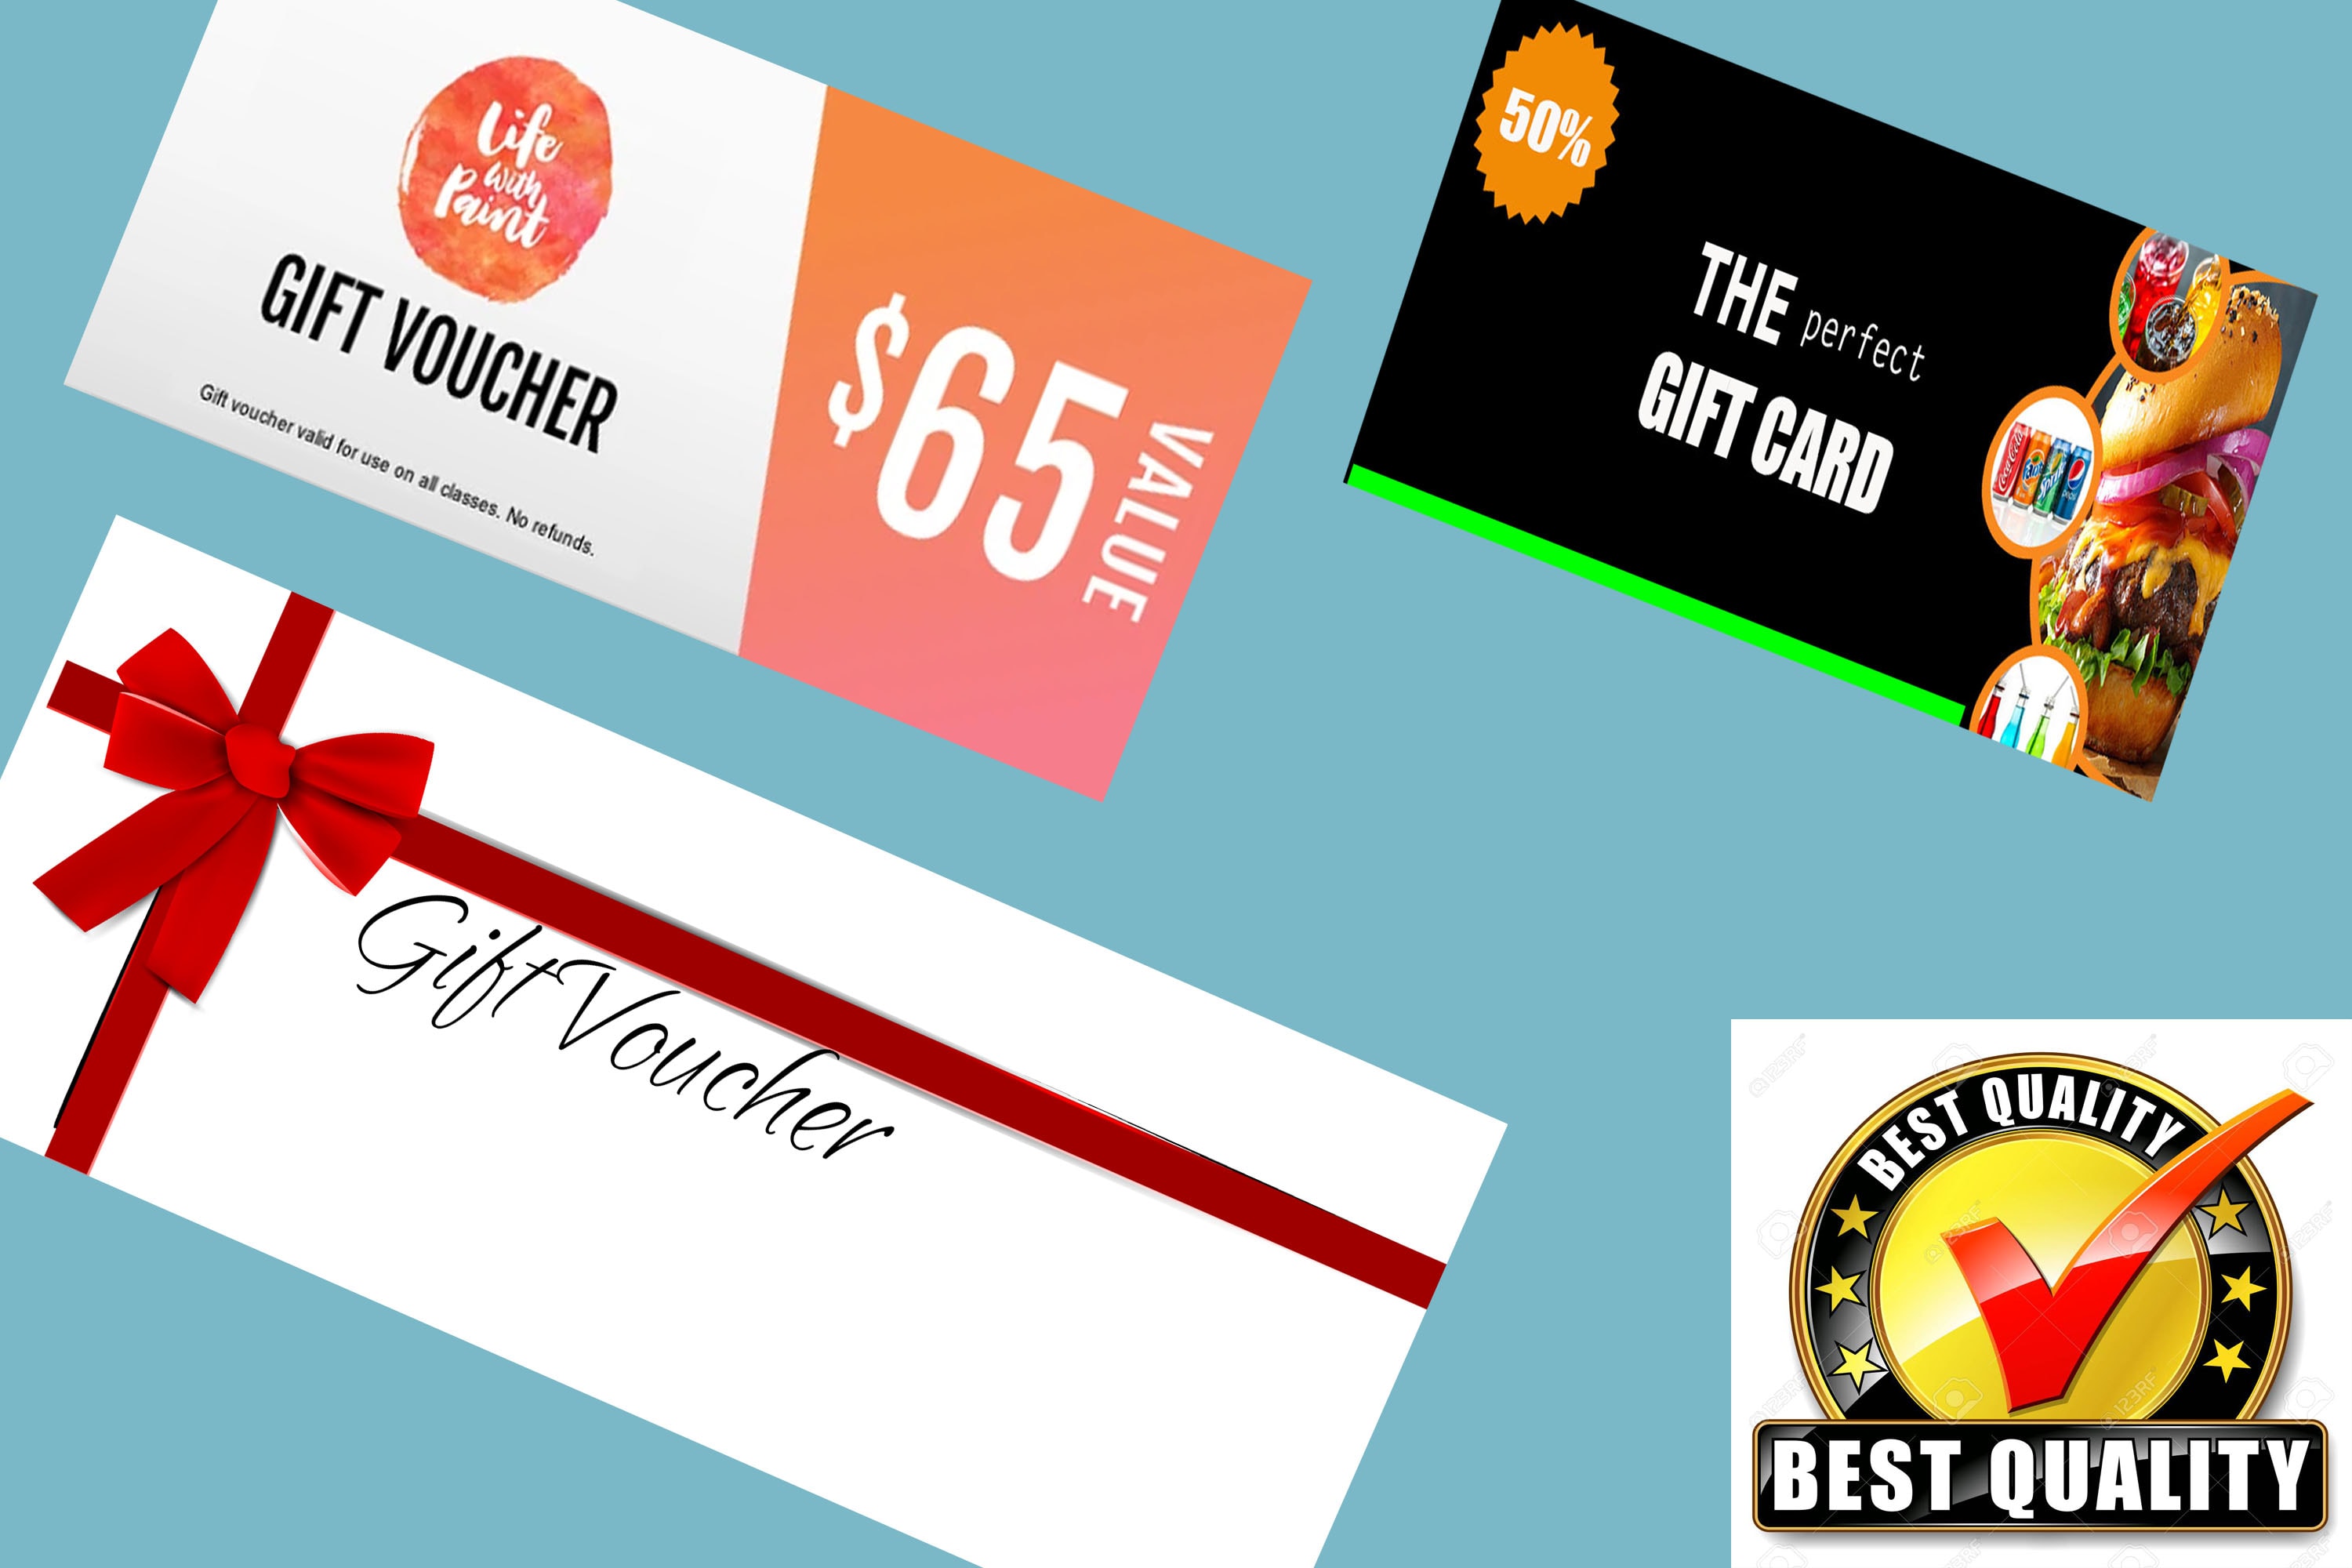 Design Custom Gift Voucher Coupons Postcard By Mnethbro